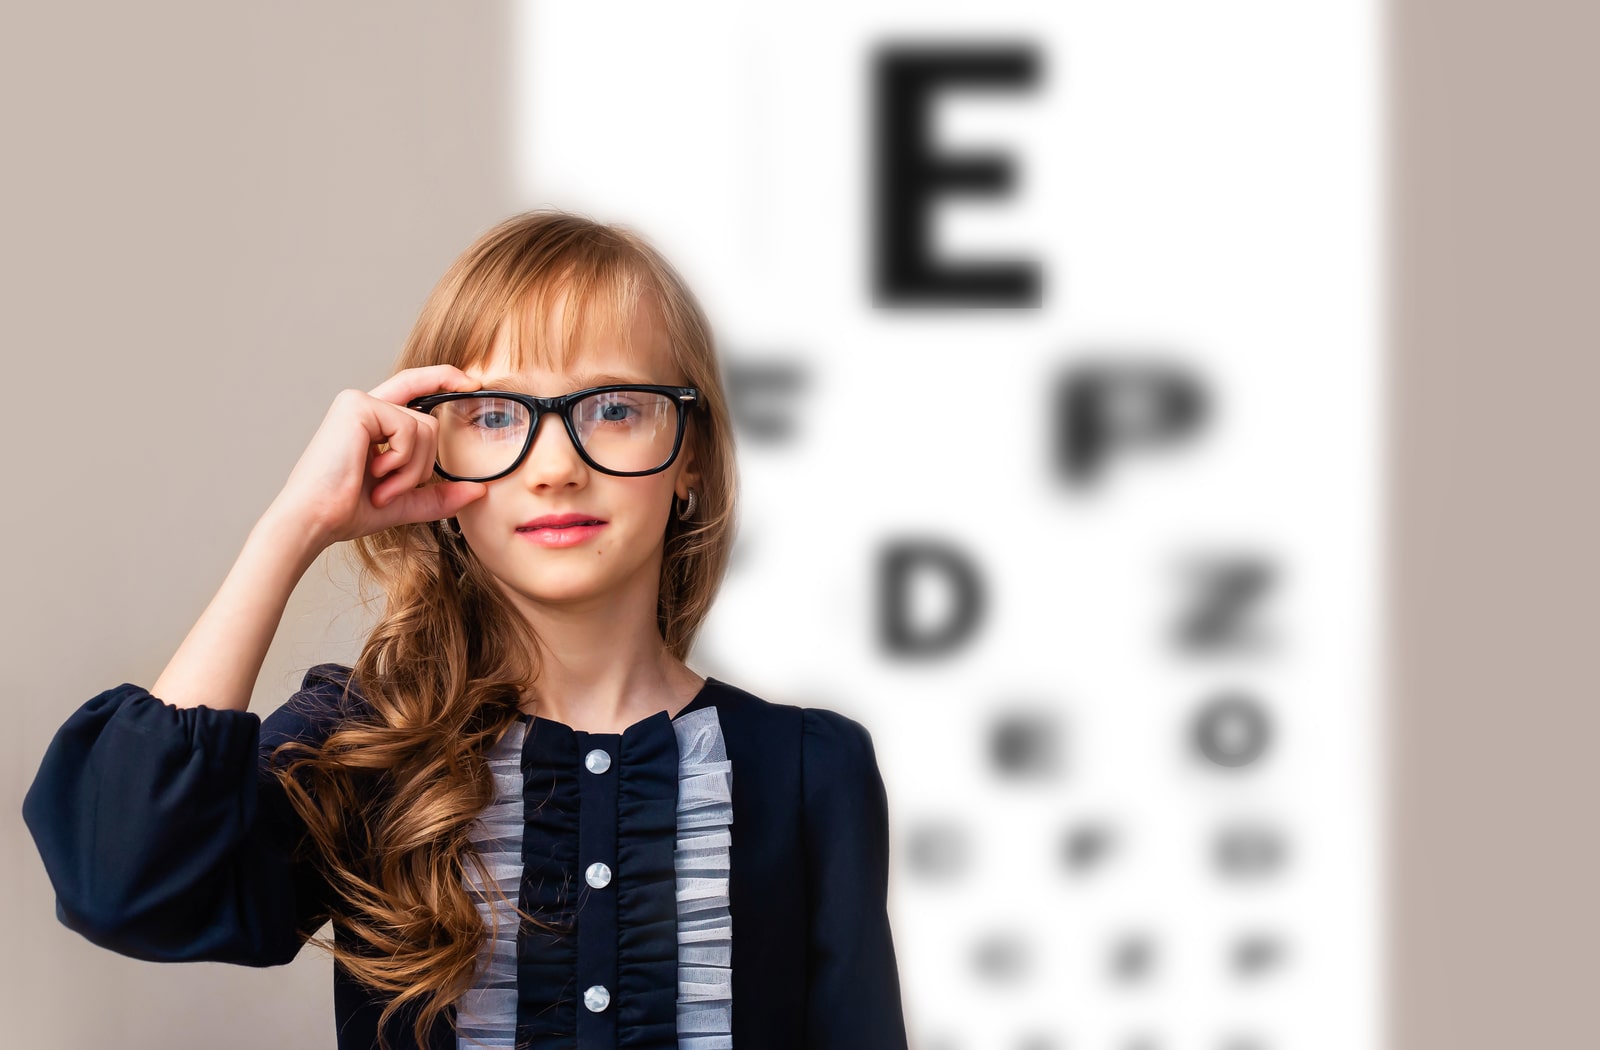 A young girl standing in front of a Snellen eye chart, with her hand on her glasses